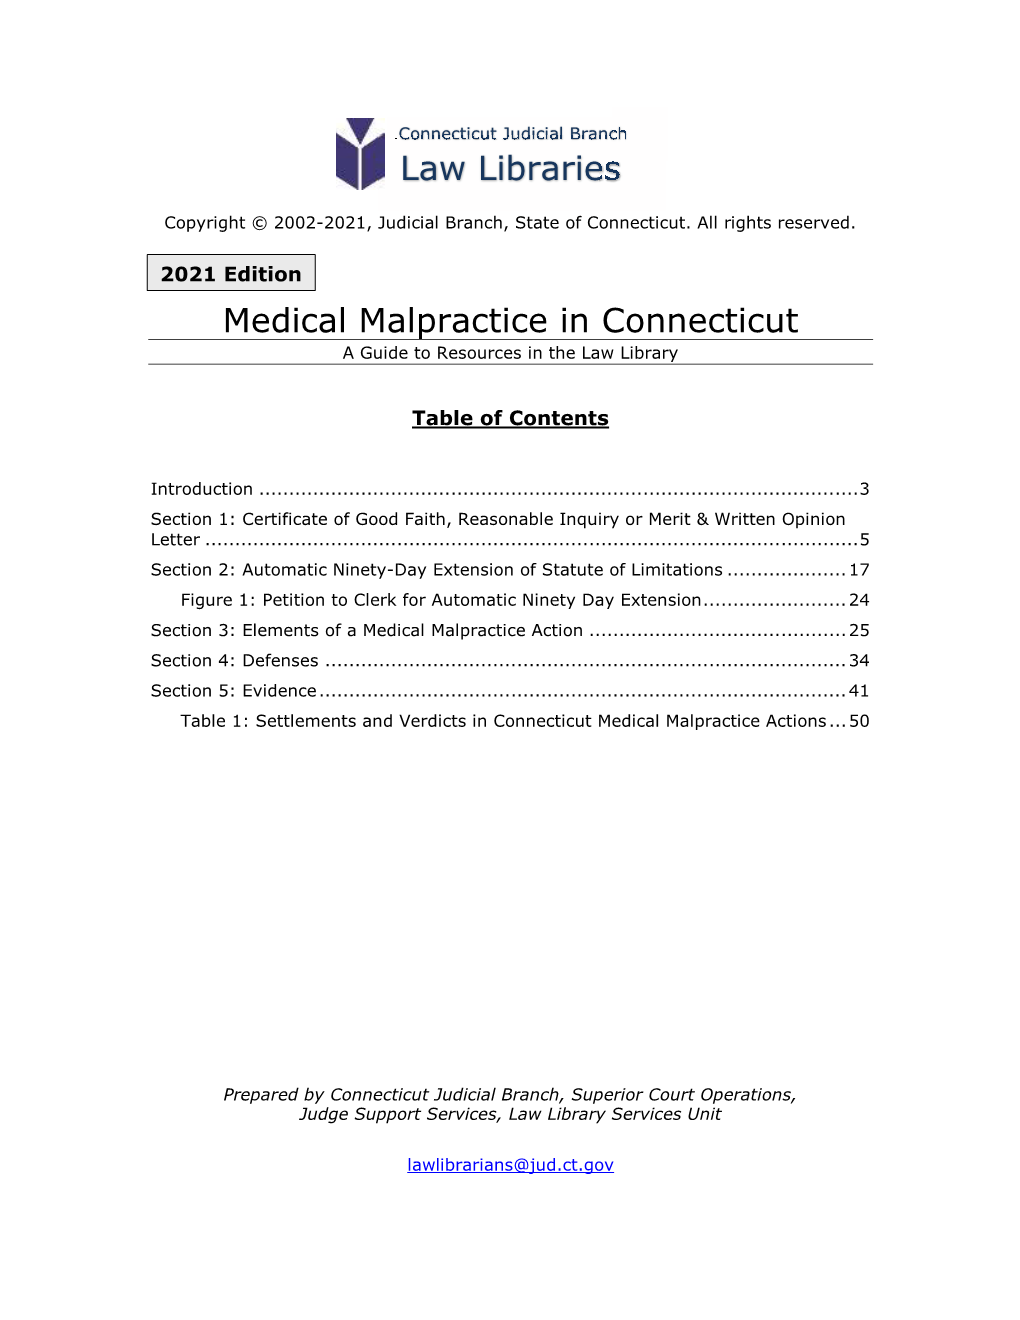 Medical Malpractice in Connecticut a Guide to Resources in the Law Library